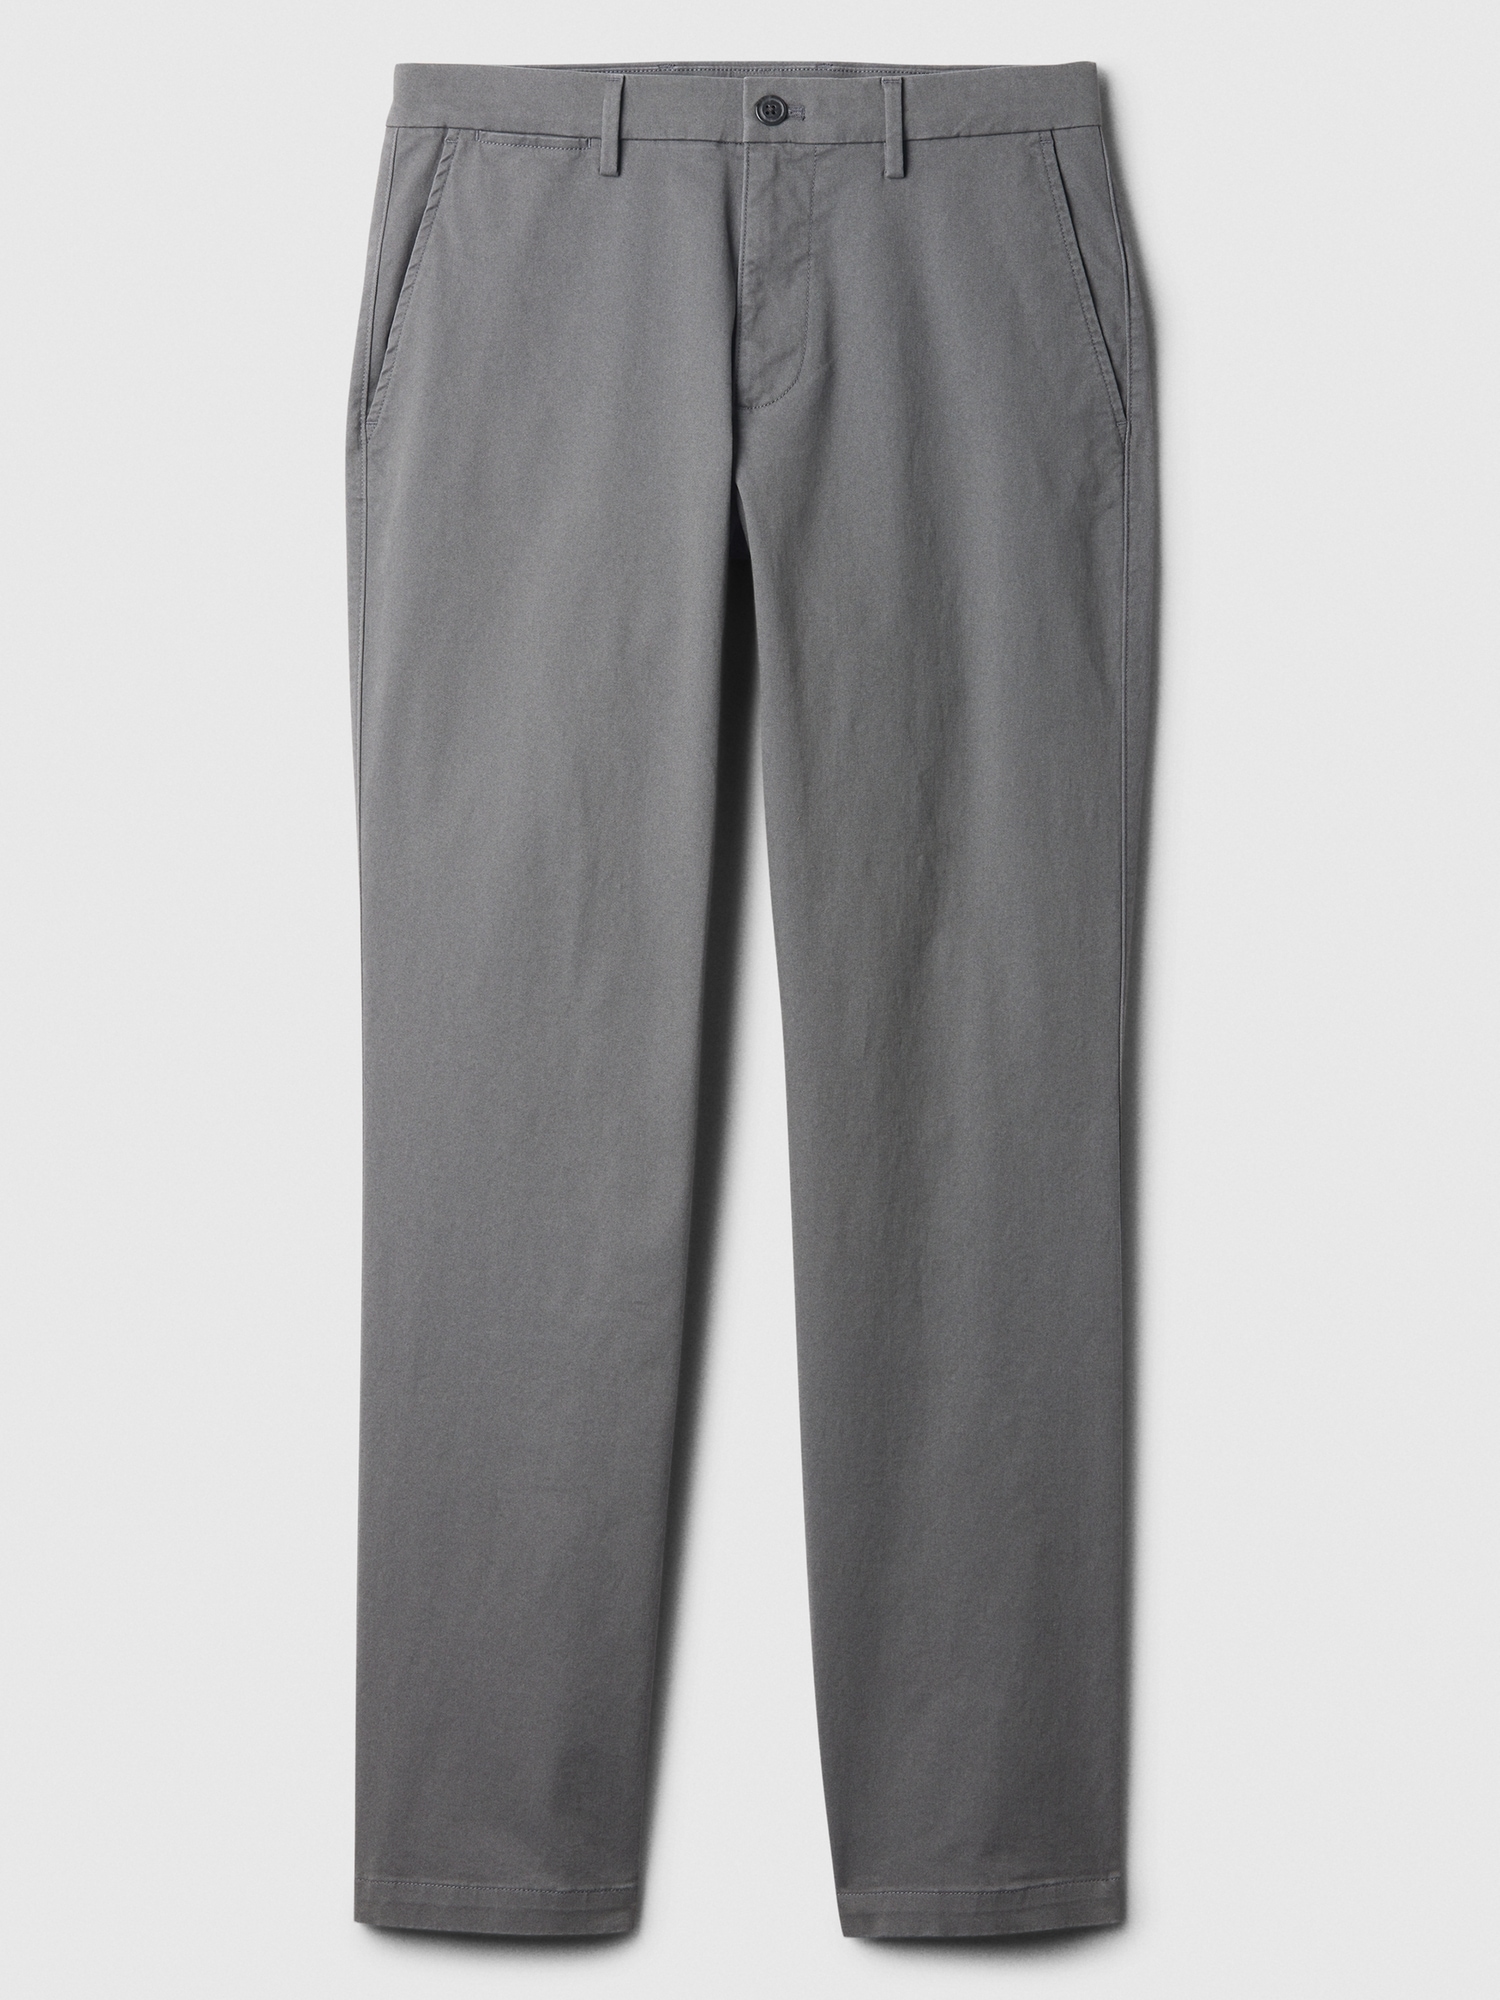 Relaxed Utility Cargo Pants in GapFlex with Washwell